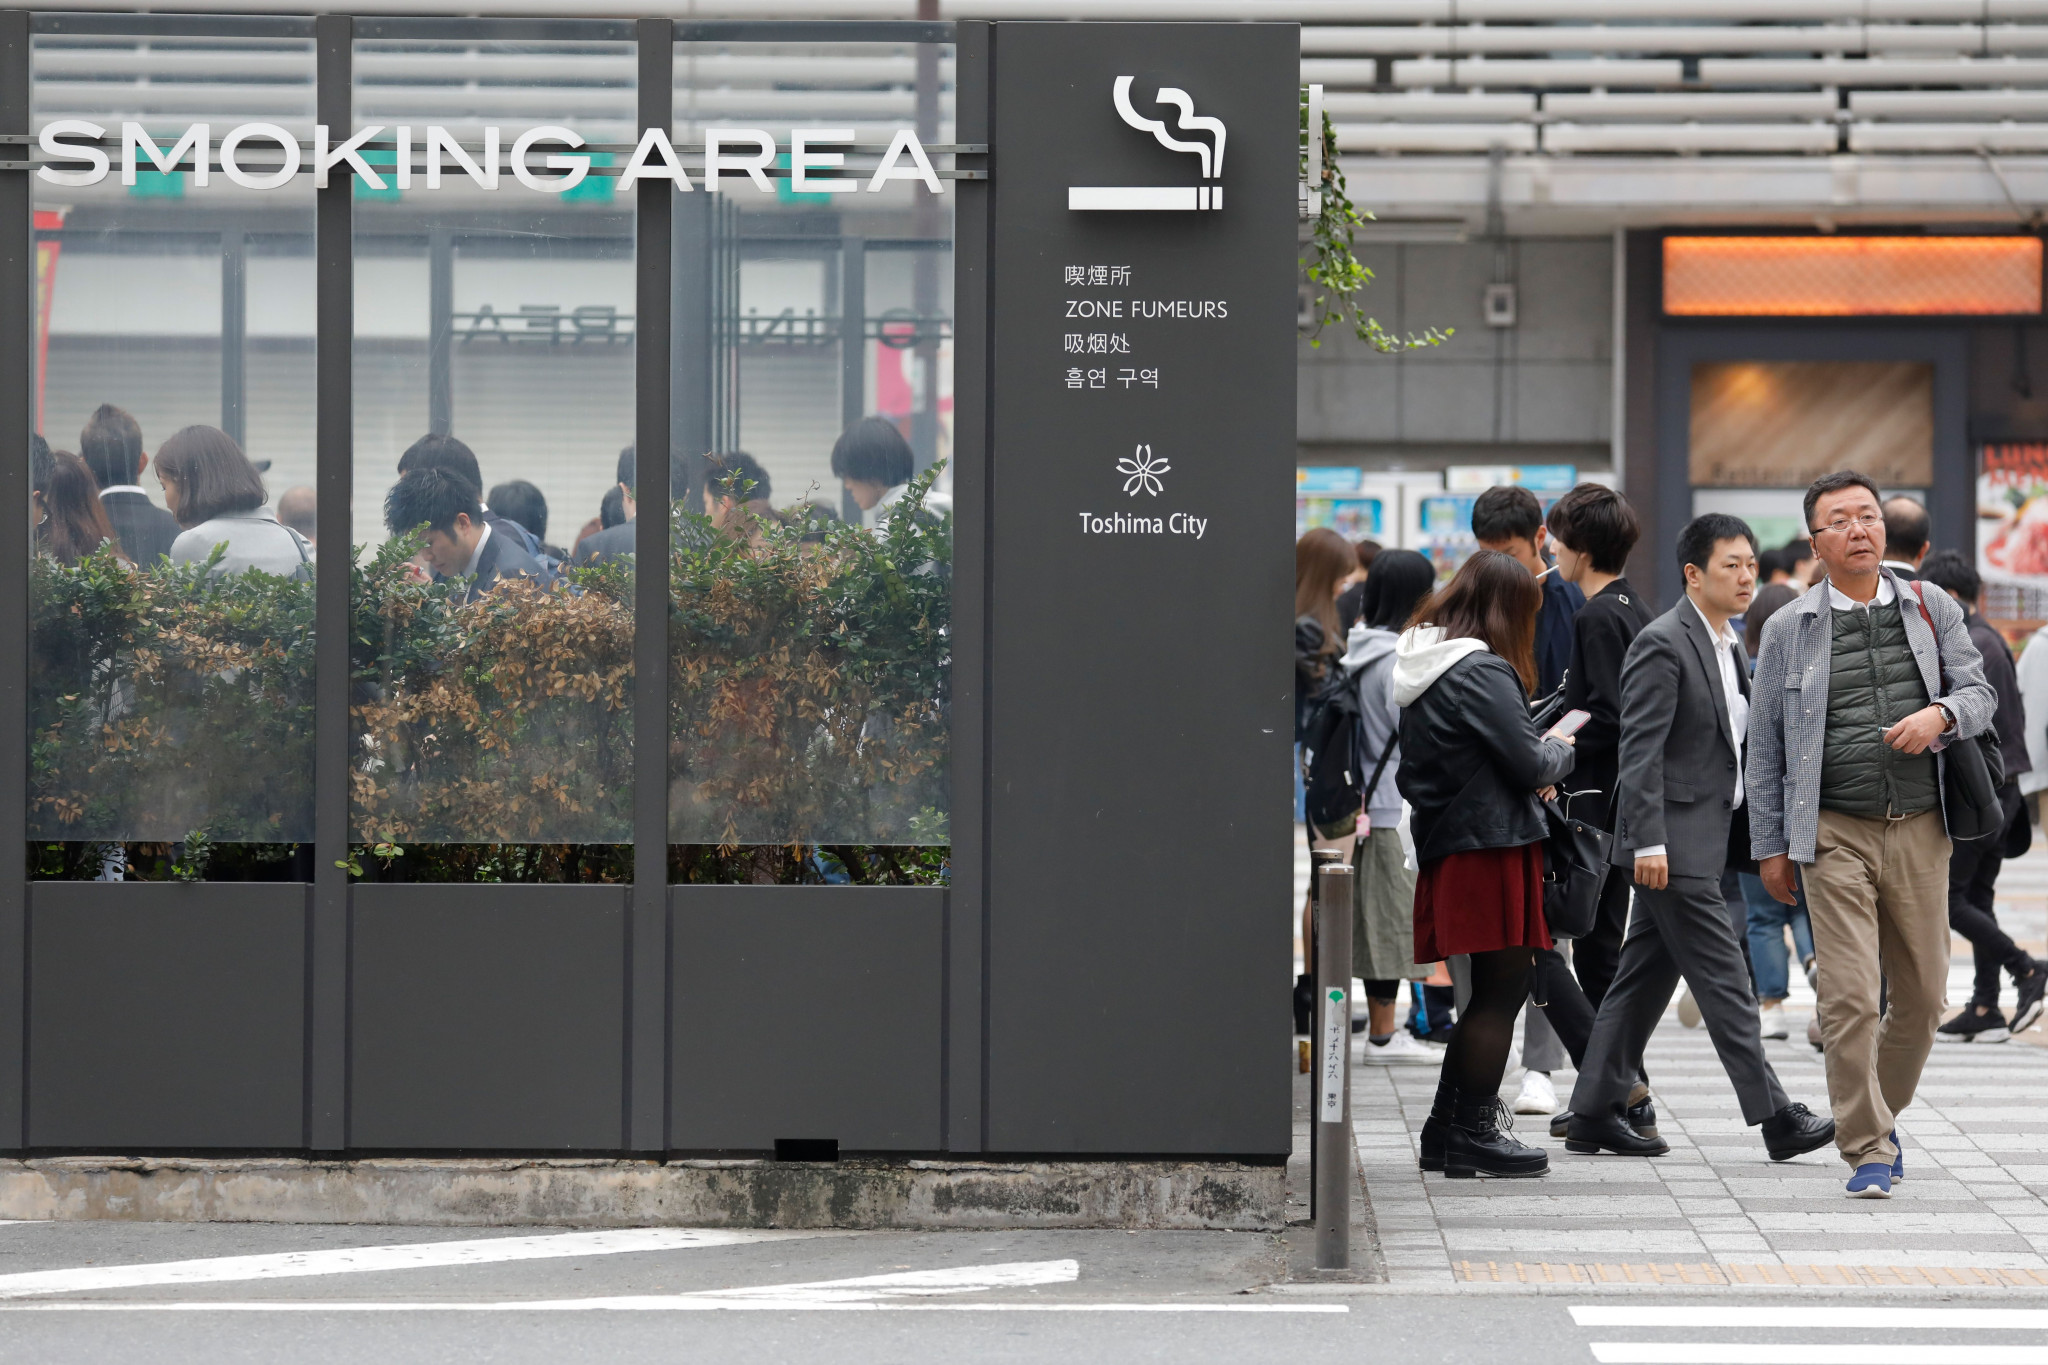 It is still legal to smoke in many public places in Japan, despite the introduction of new legislation ©Getty Images